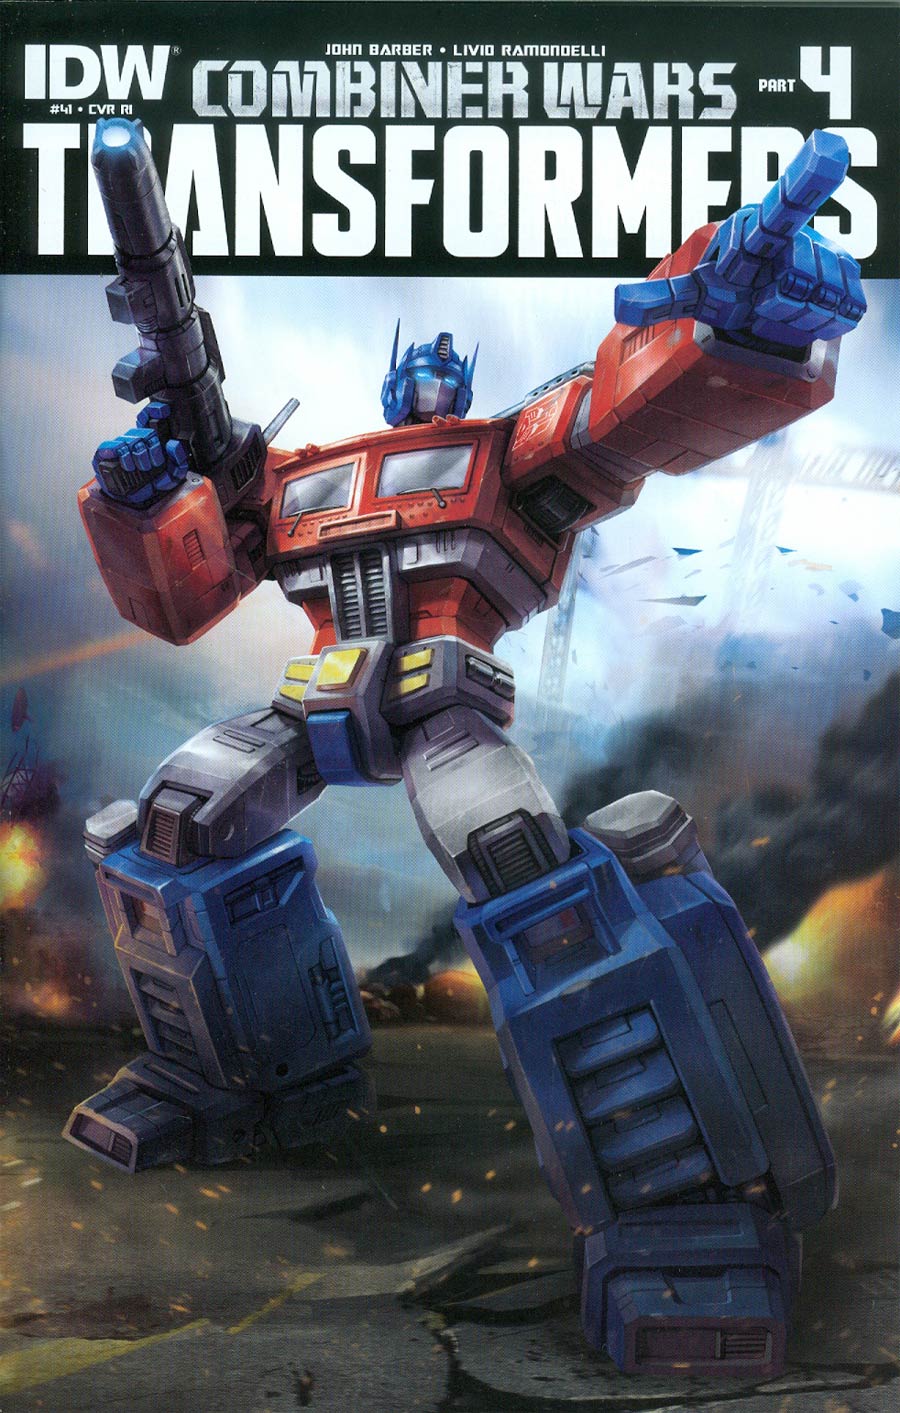 Transformers Vol 3 #41 Cover C Incentive Hasbro Combiner Wars Poster Variant Cover (Combiner Wars Part 4)